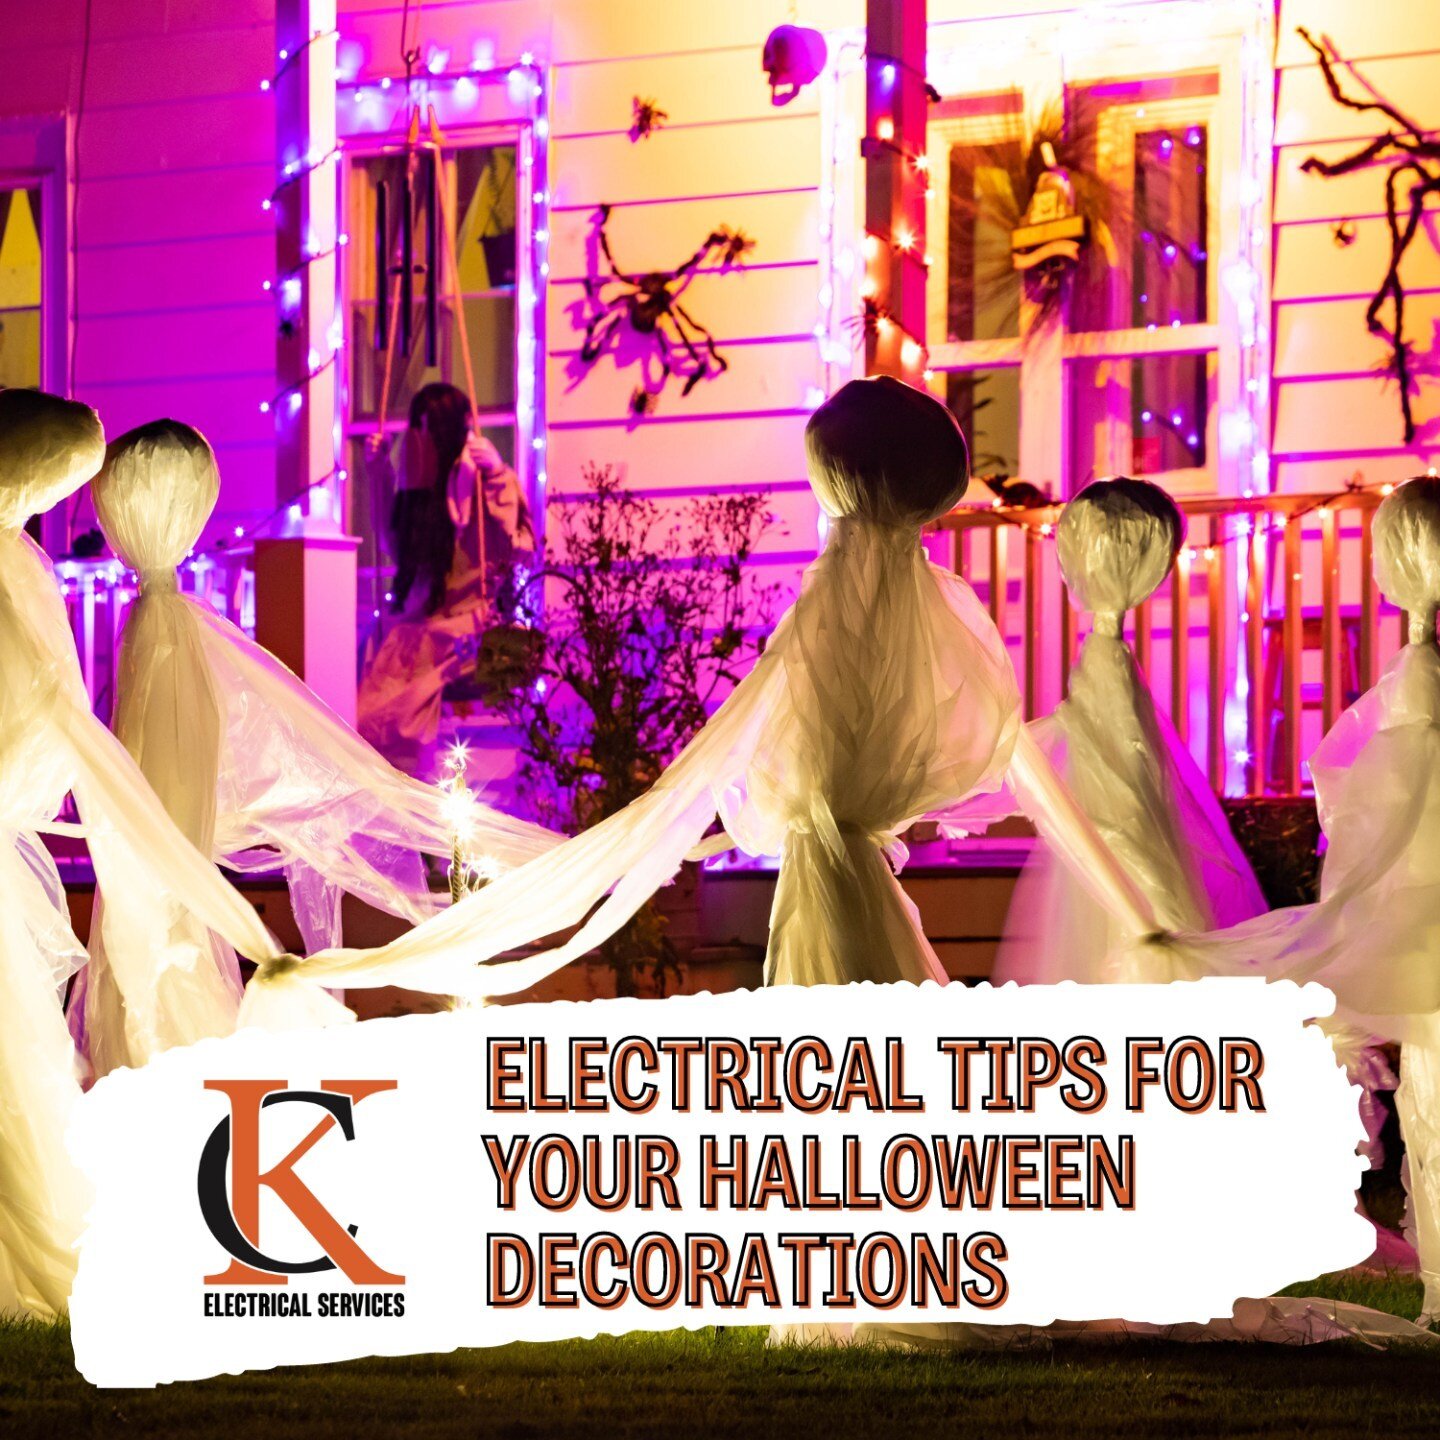 🎃 Level up your outdoor Halloween decor with these electrifying tips! 💡 From spooky lighting to animatronic creatures, we've got you covered. Our expert advice will help you create a bewitching spectacle while keeping electrical hazards at bay. 👉 